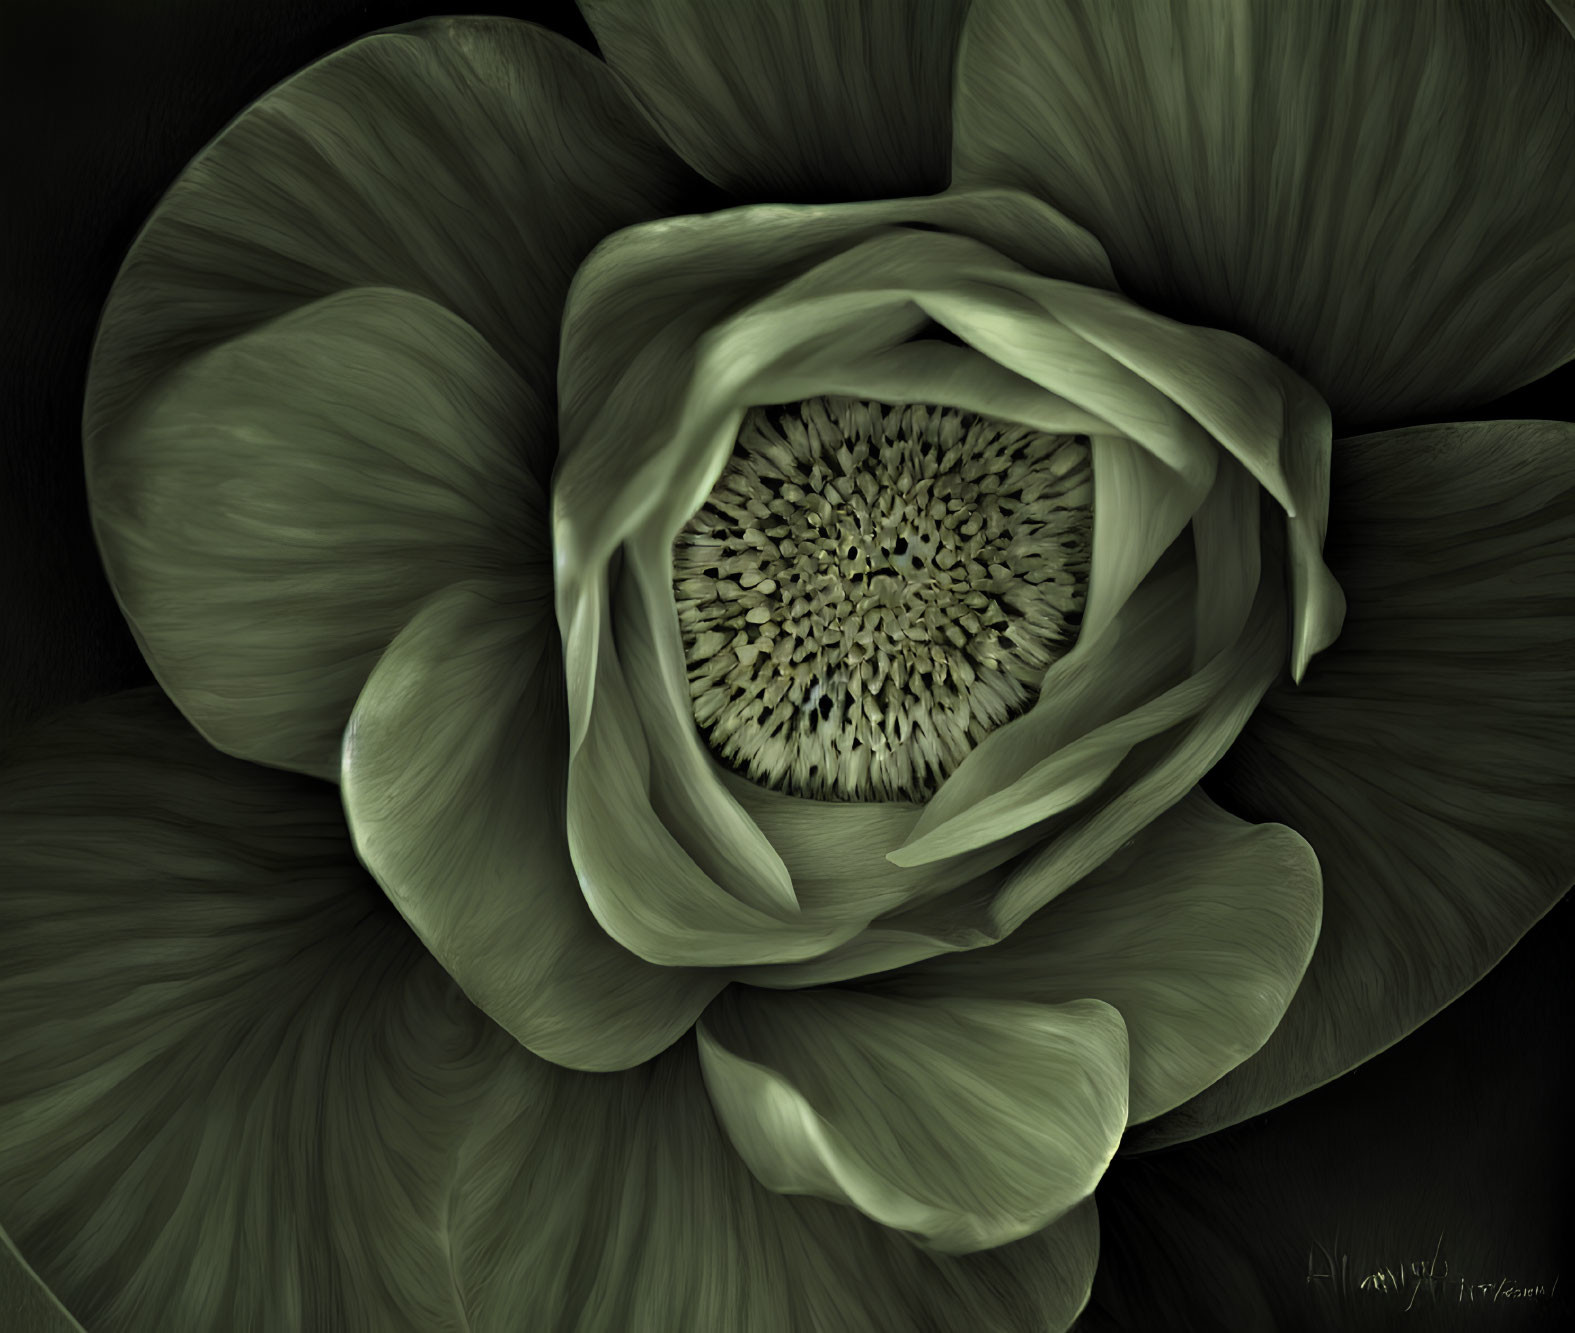 Greenish flower with layered petals and textured center resembling a sea anemone